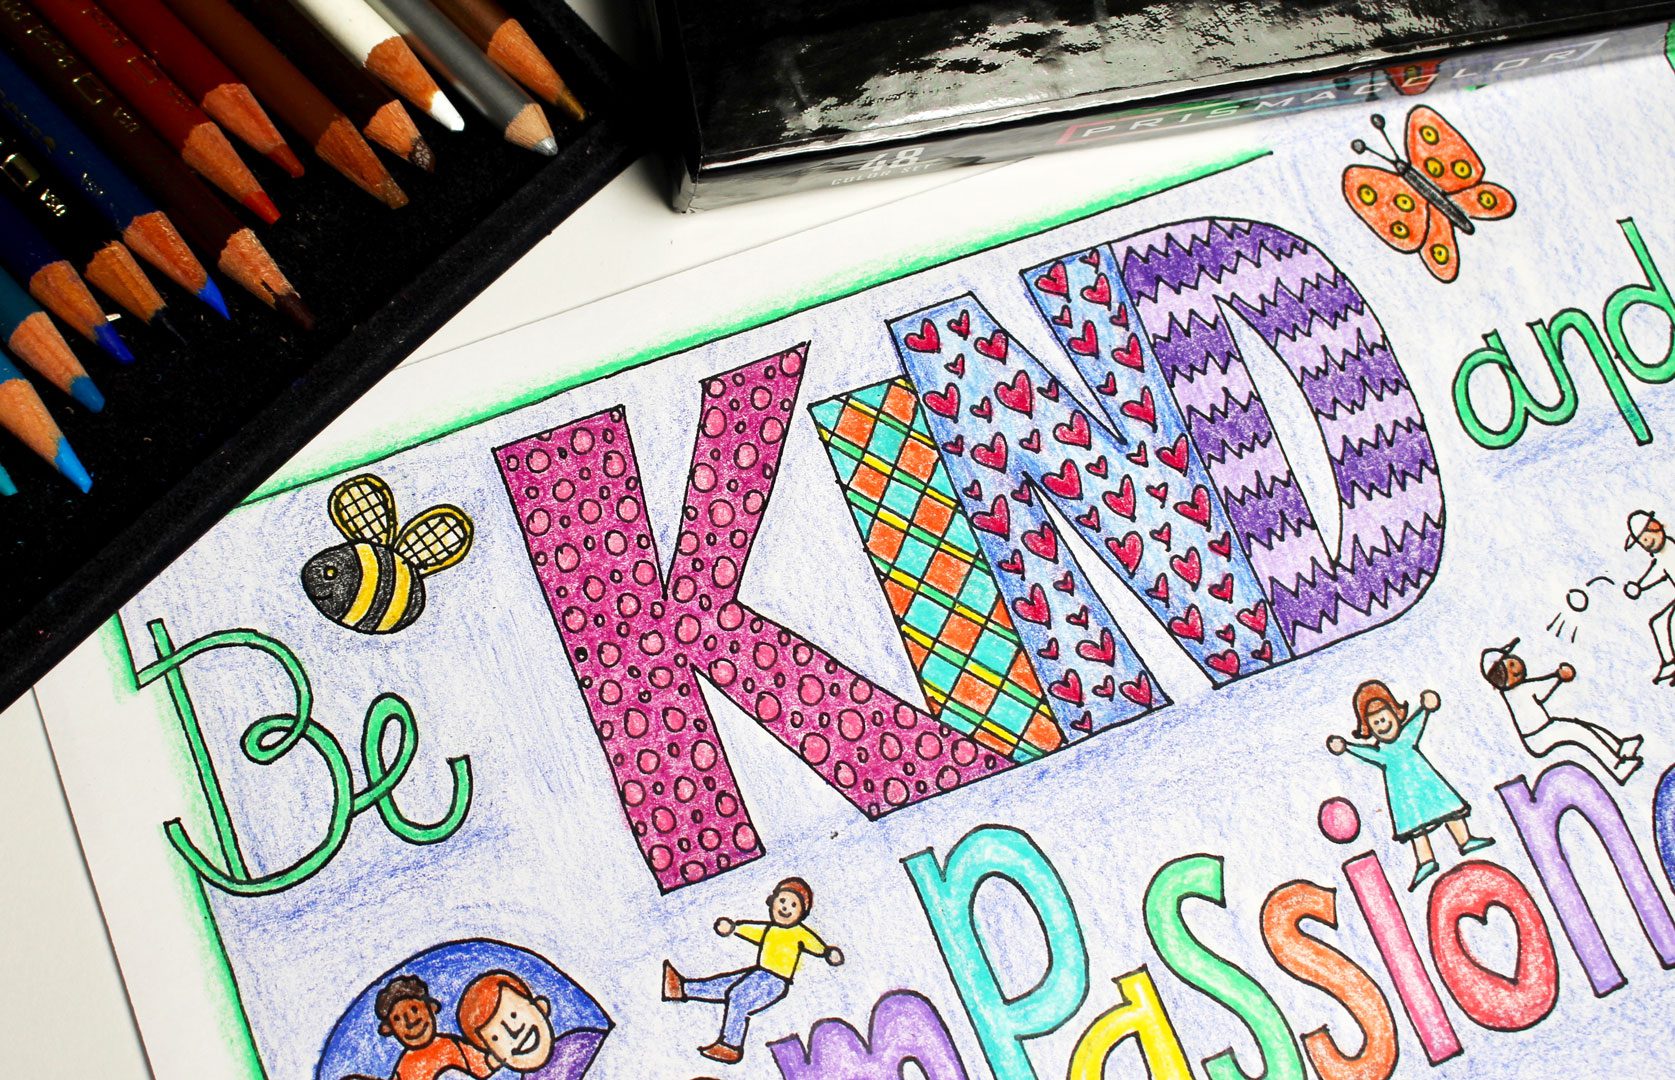 A coloring page with the words "Be Kind and Compassionate To one Another", colored by colored pencils.